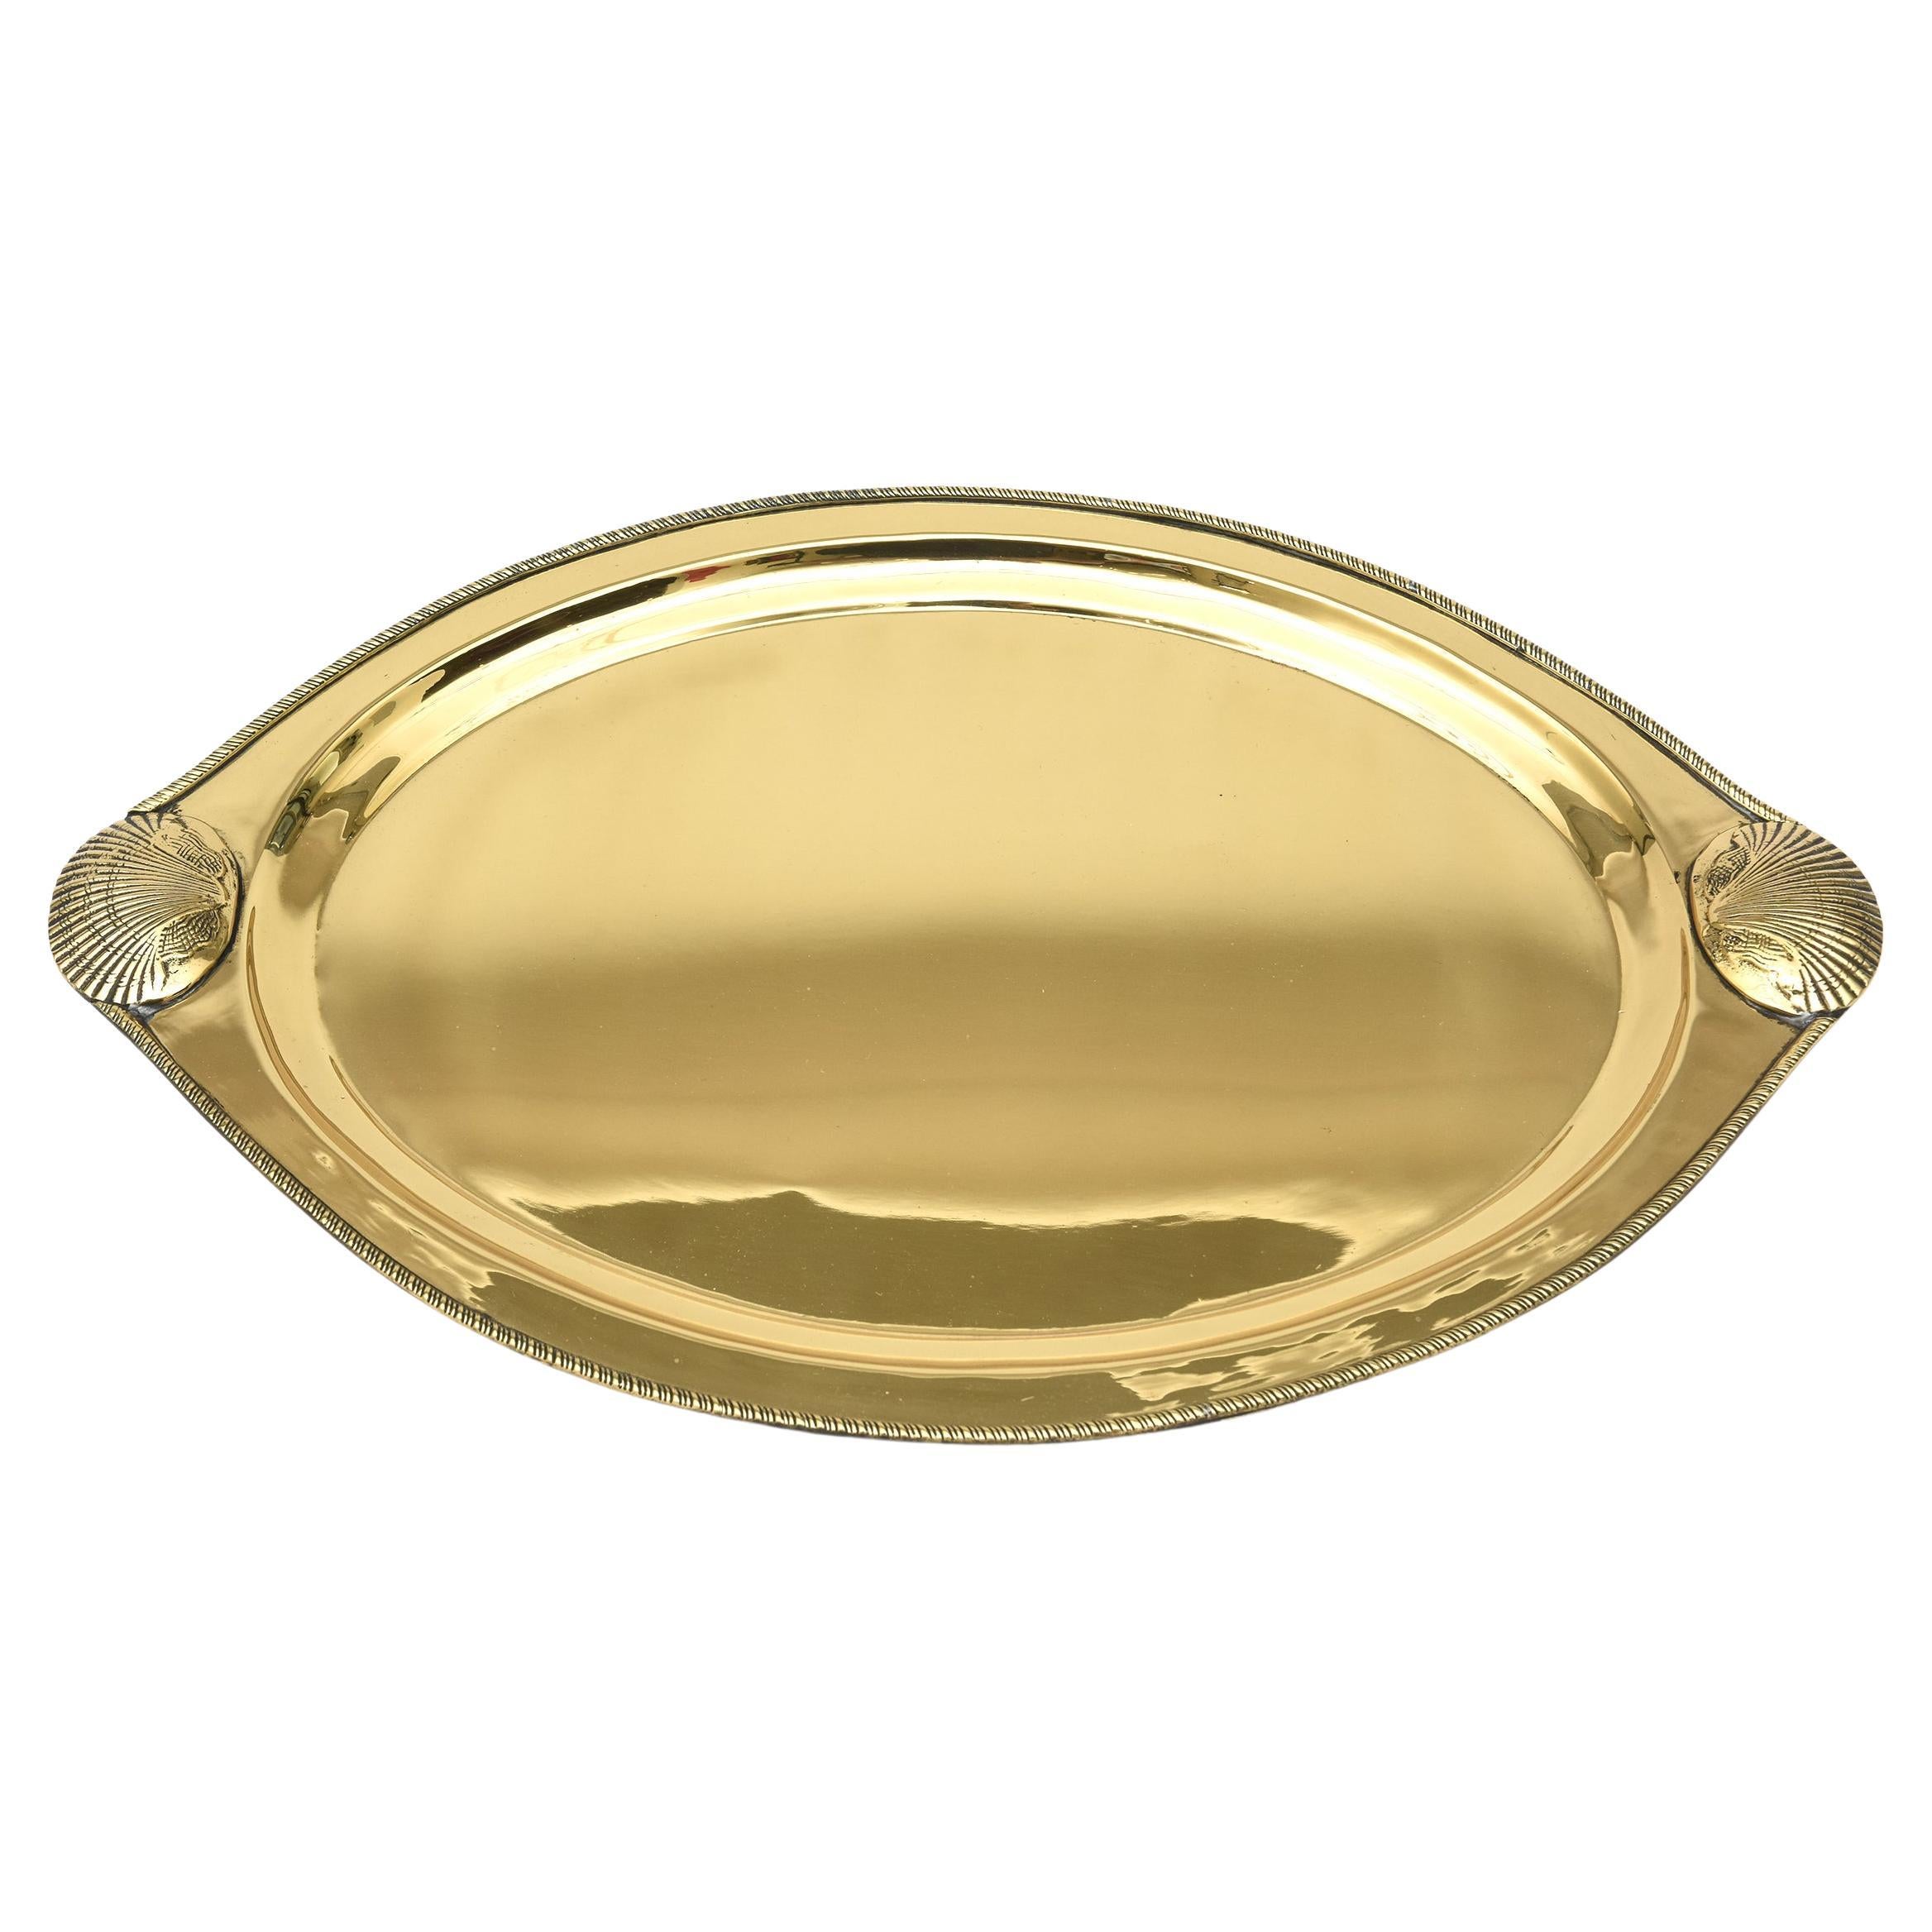 Vintage Brass Oval Tray With Shell Design Barware For Sale